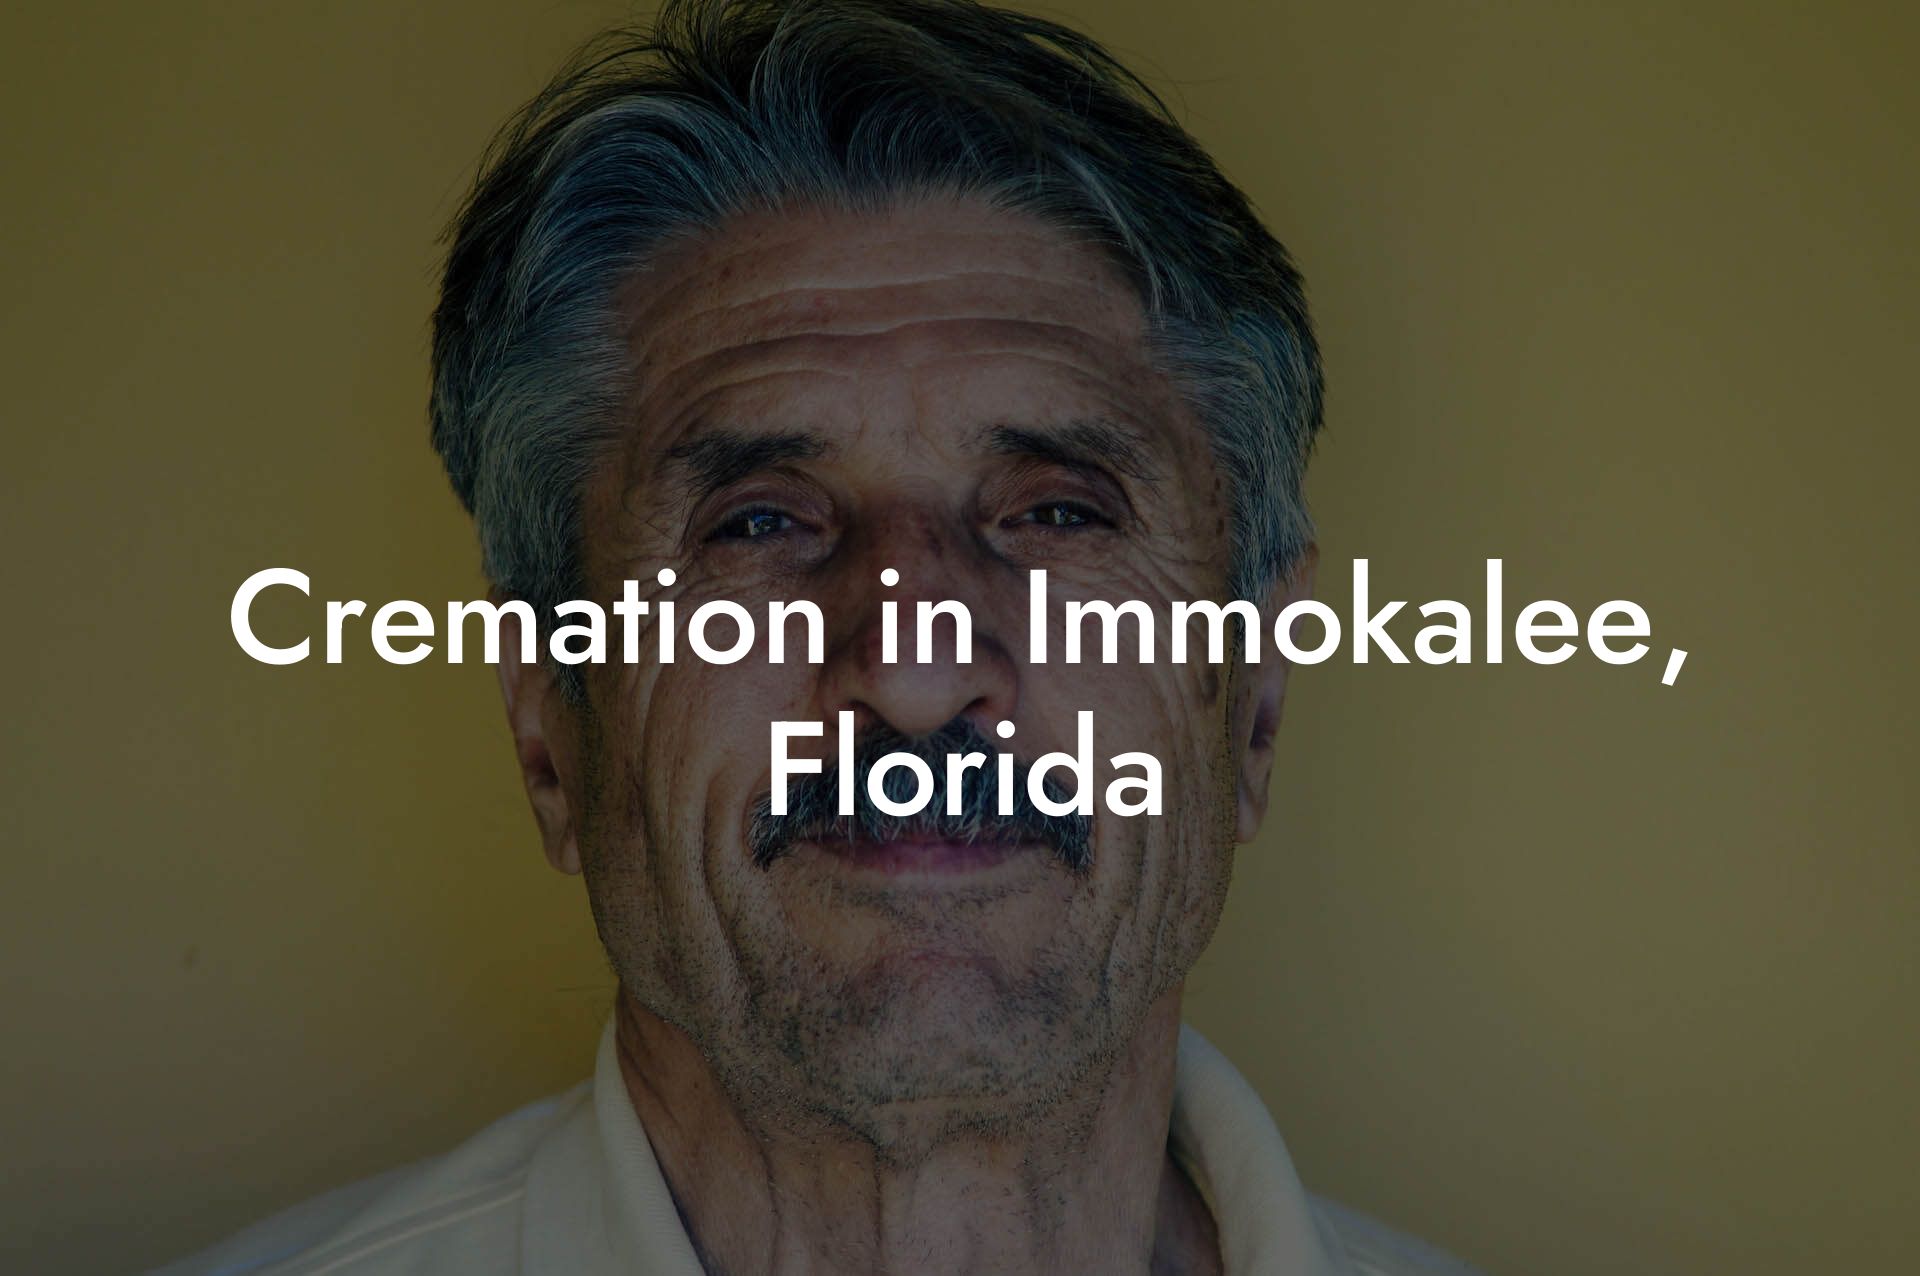 Cremation in Immokalee, Florida